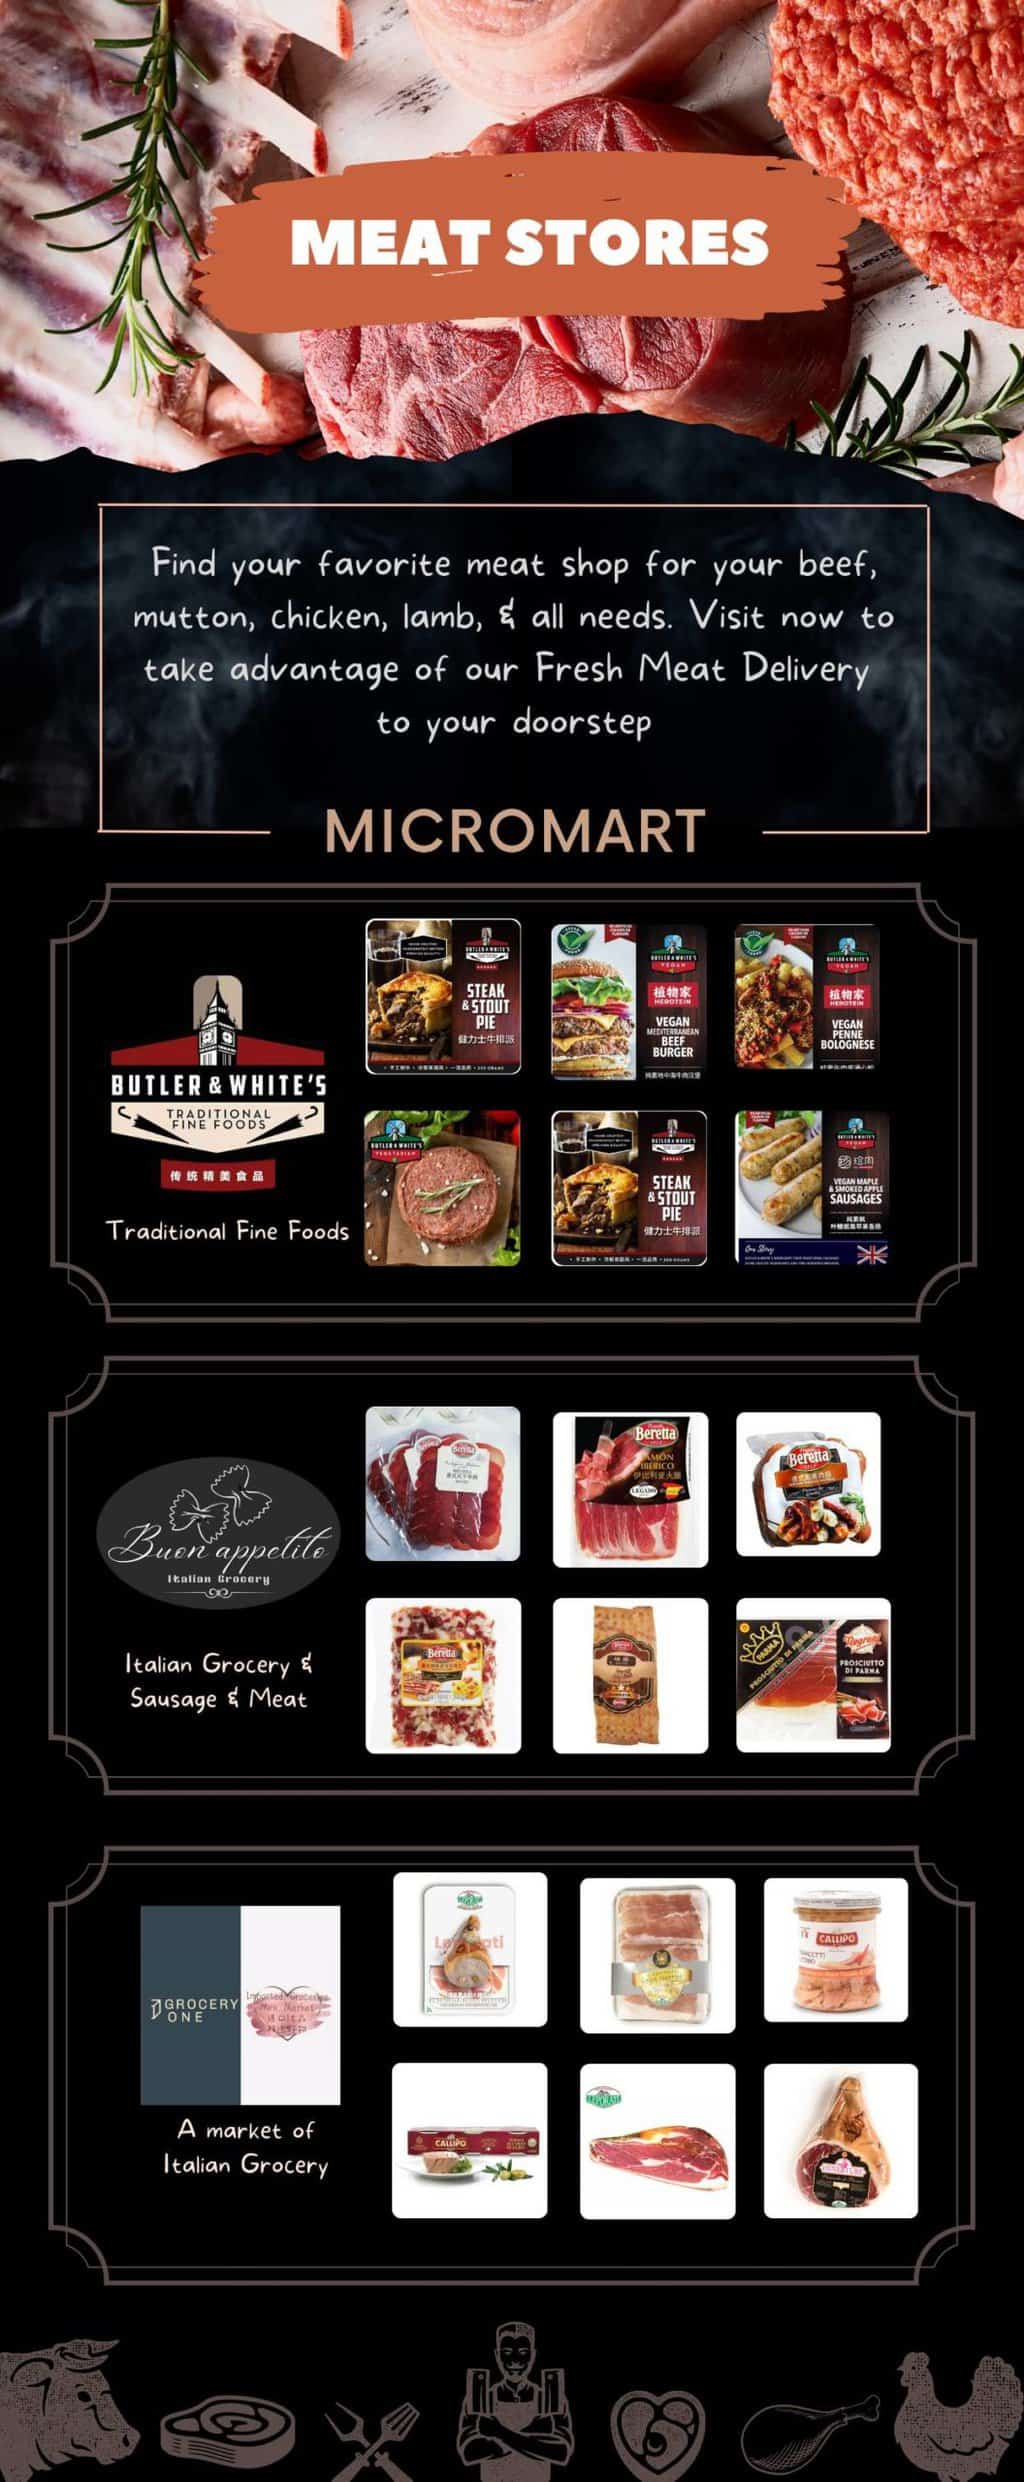 Micromart - Meat Stores